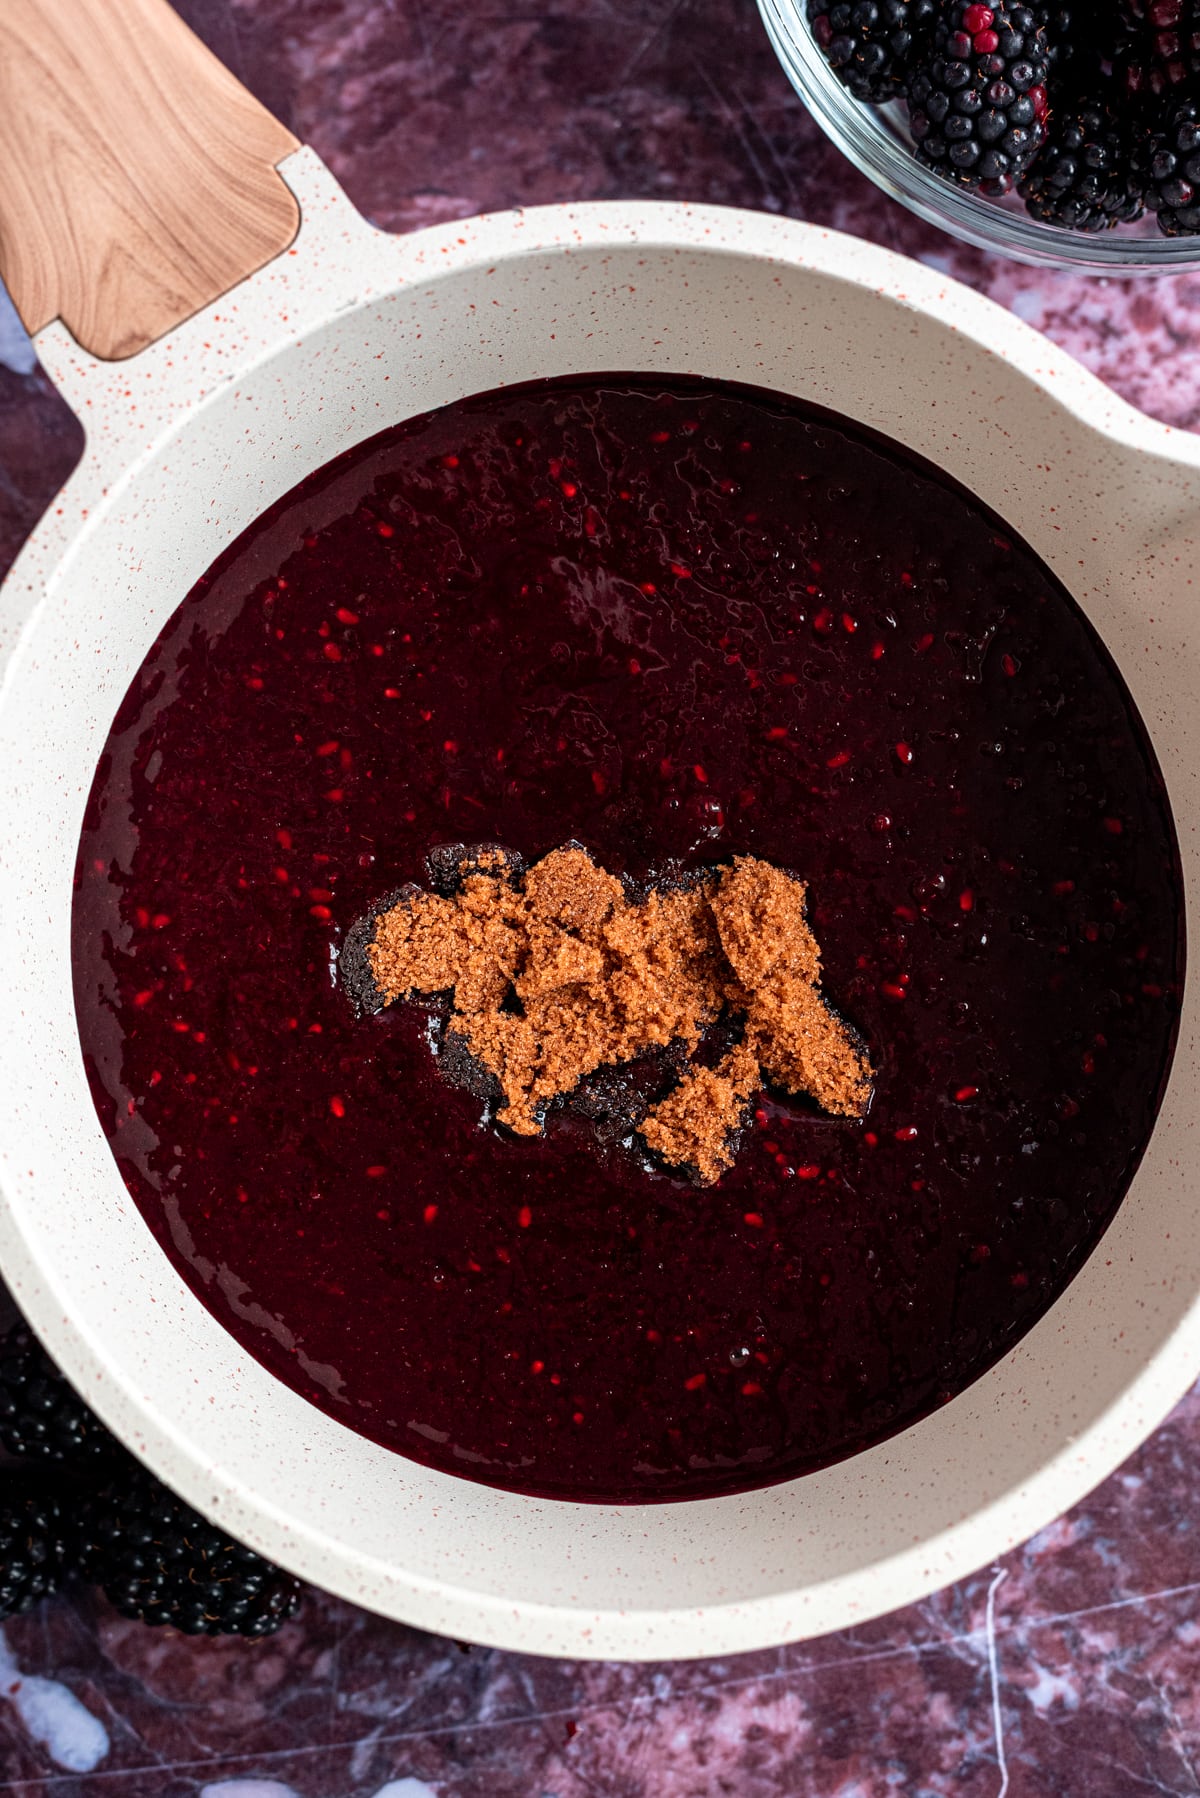 The pureed blackberries in a small white pot with the brown sugar setting on top.